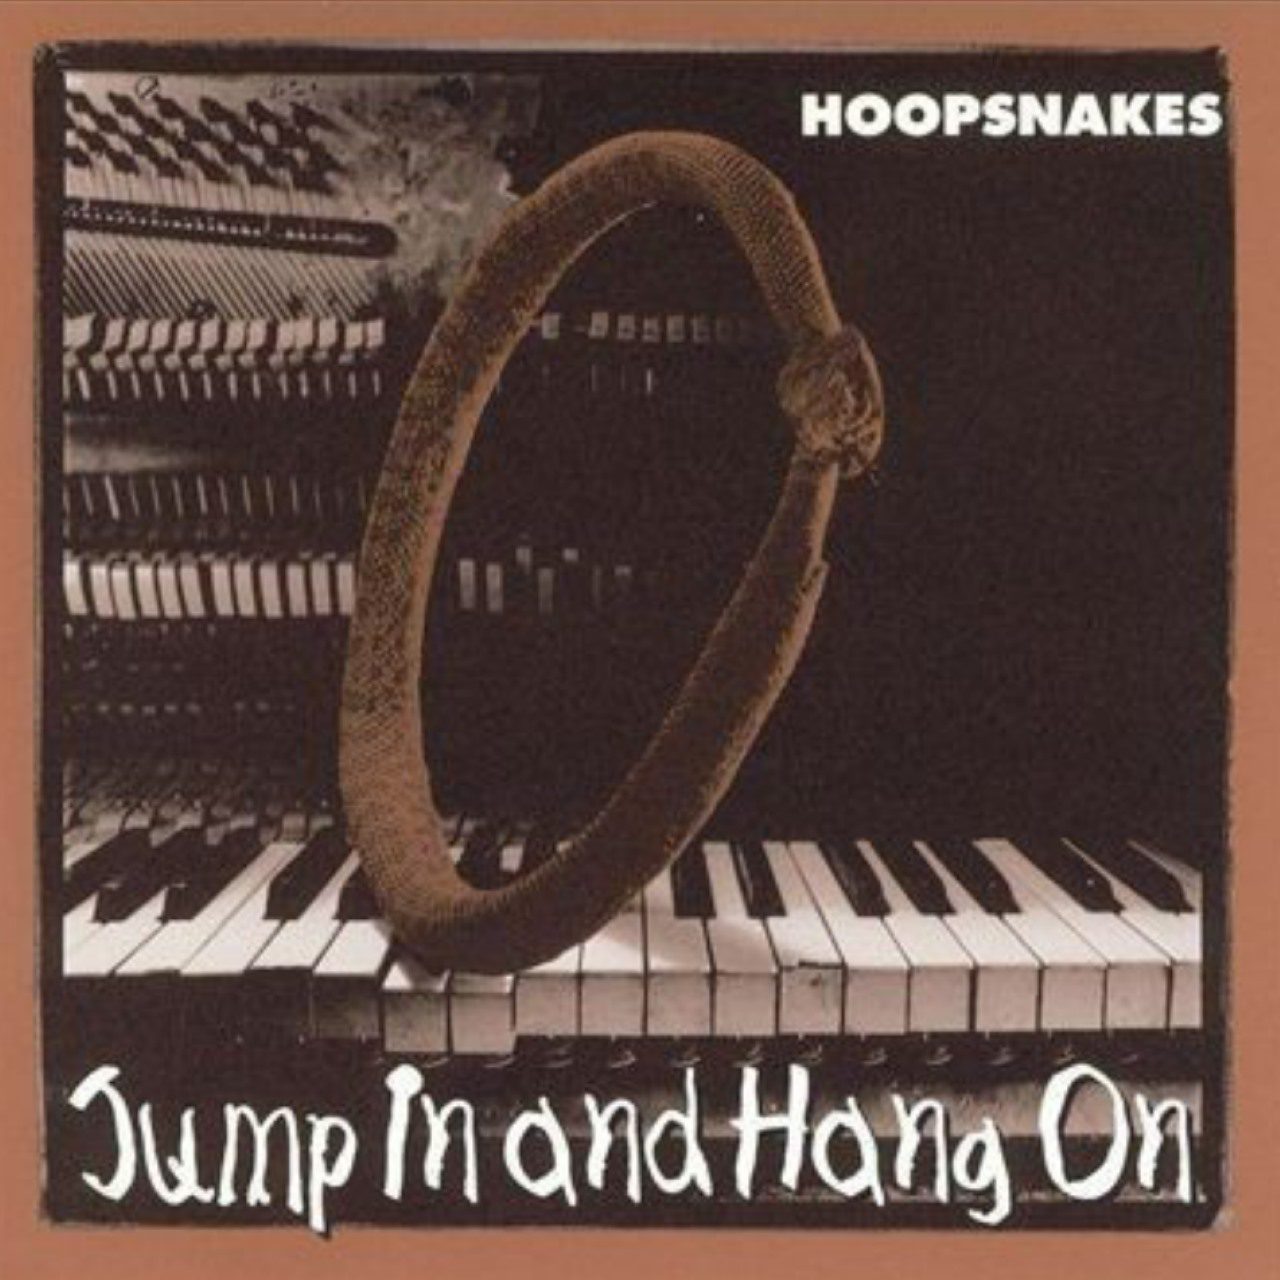 Hoopsnakes – Jump In And Hang On cover album